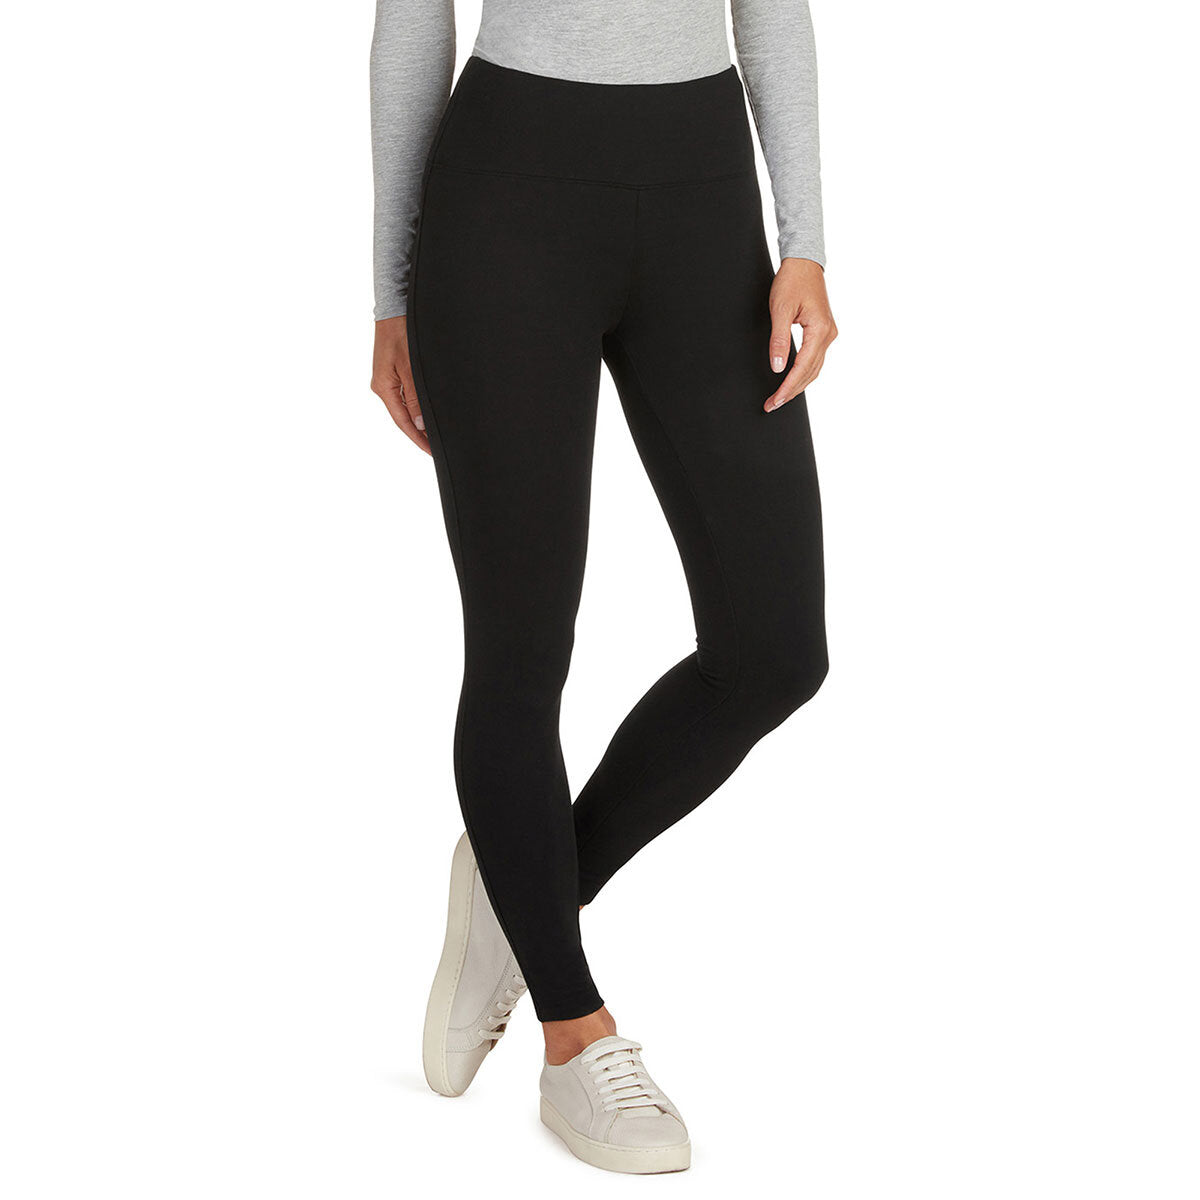 Comfortable multi-use compression pants from Max &amp; Mia